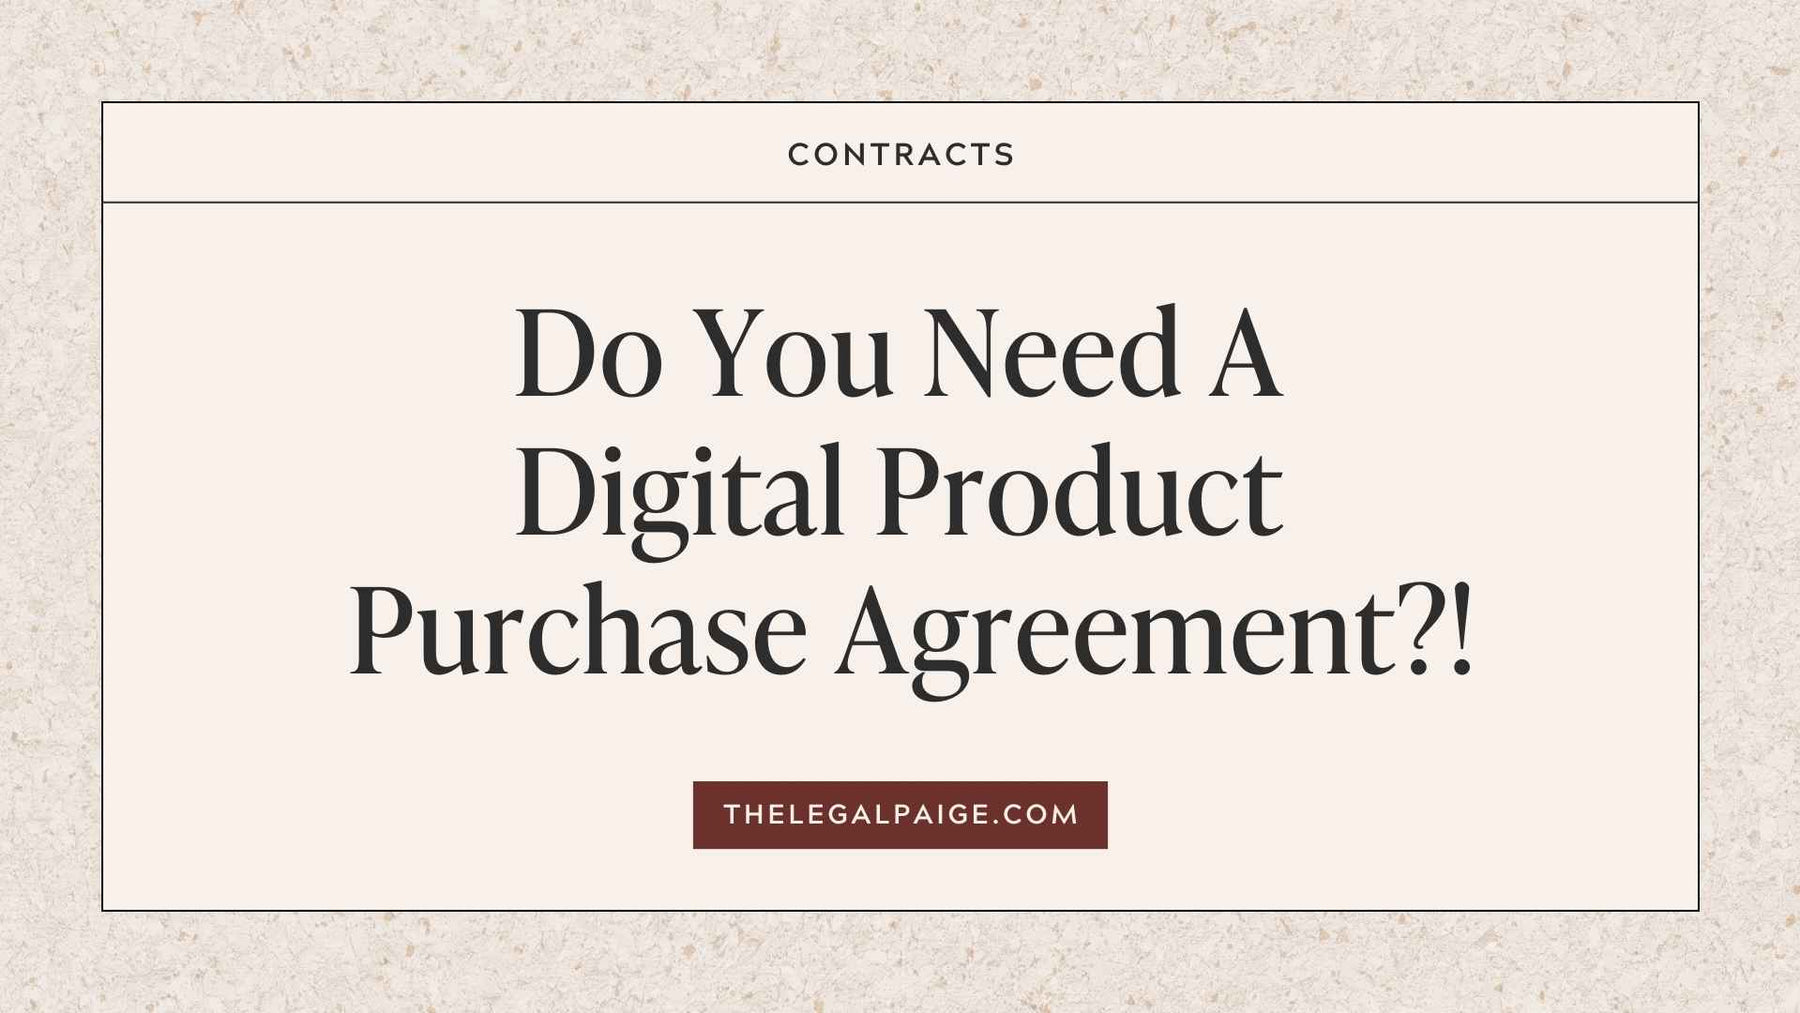 Do You Need A Digital Product Purchase Agreement?!